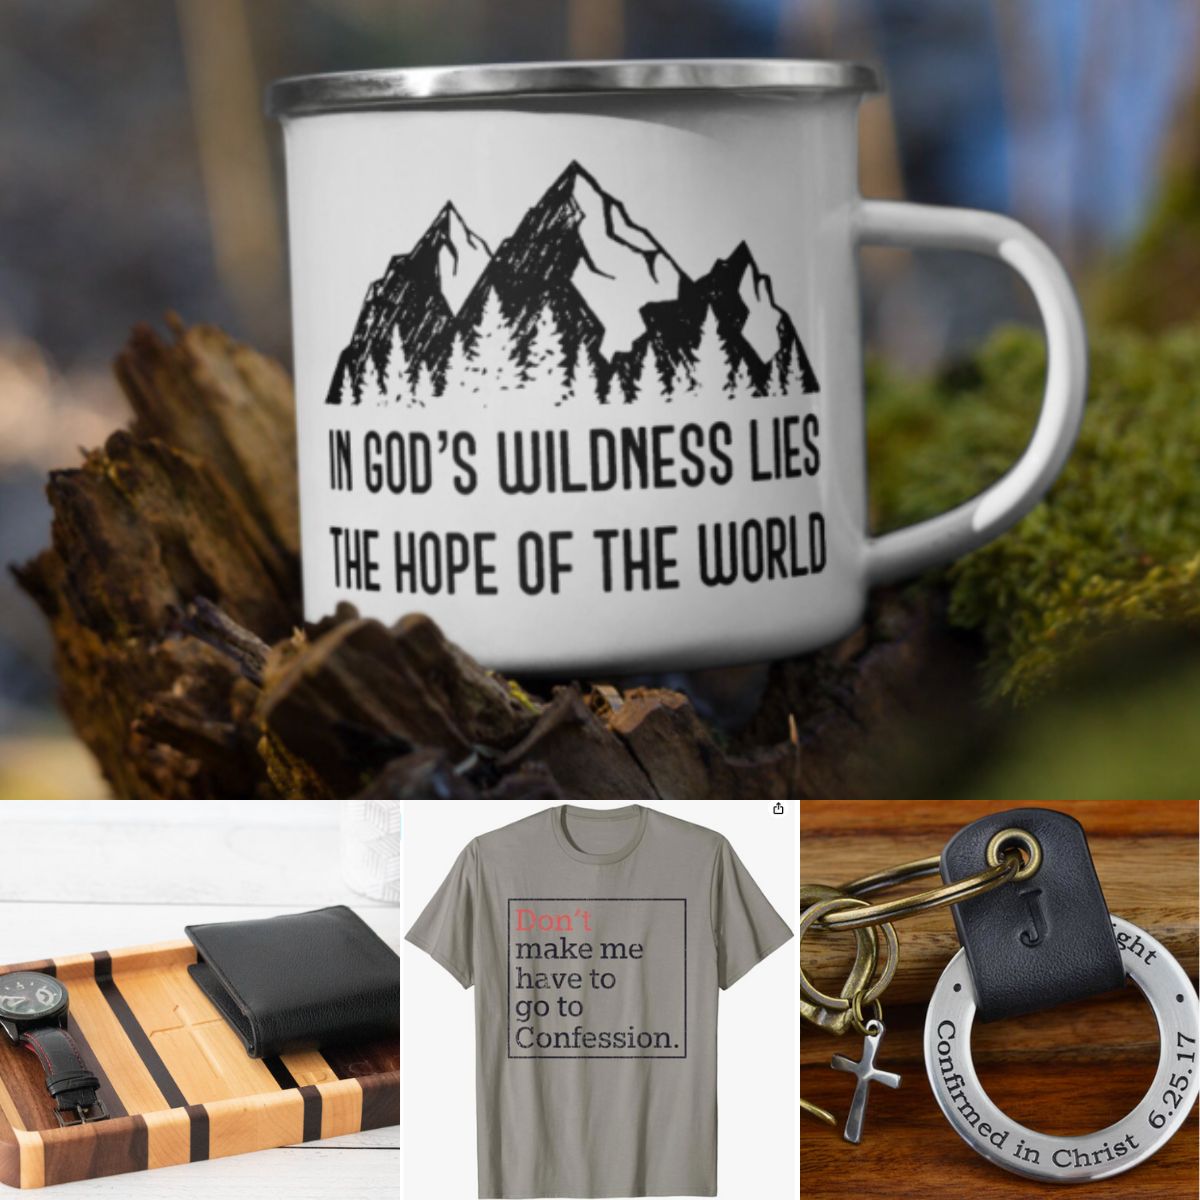 The photo collage shows a camp mug, a tee, a wooden tray, and a key ring.